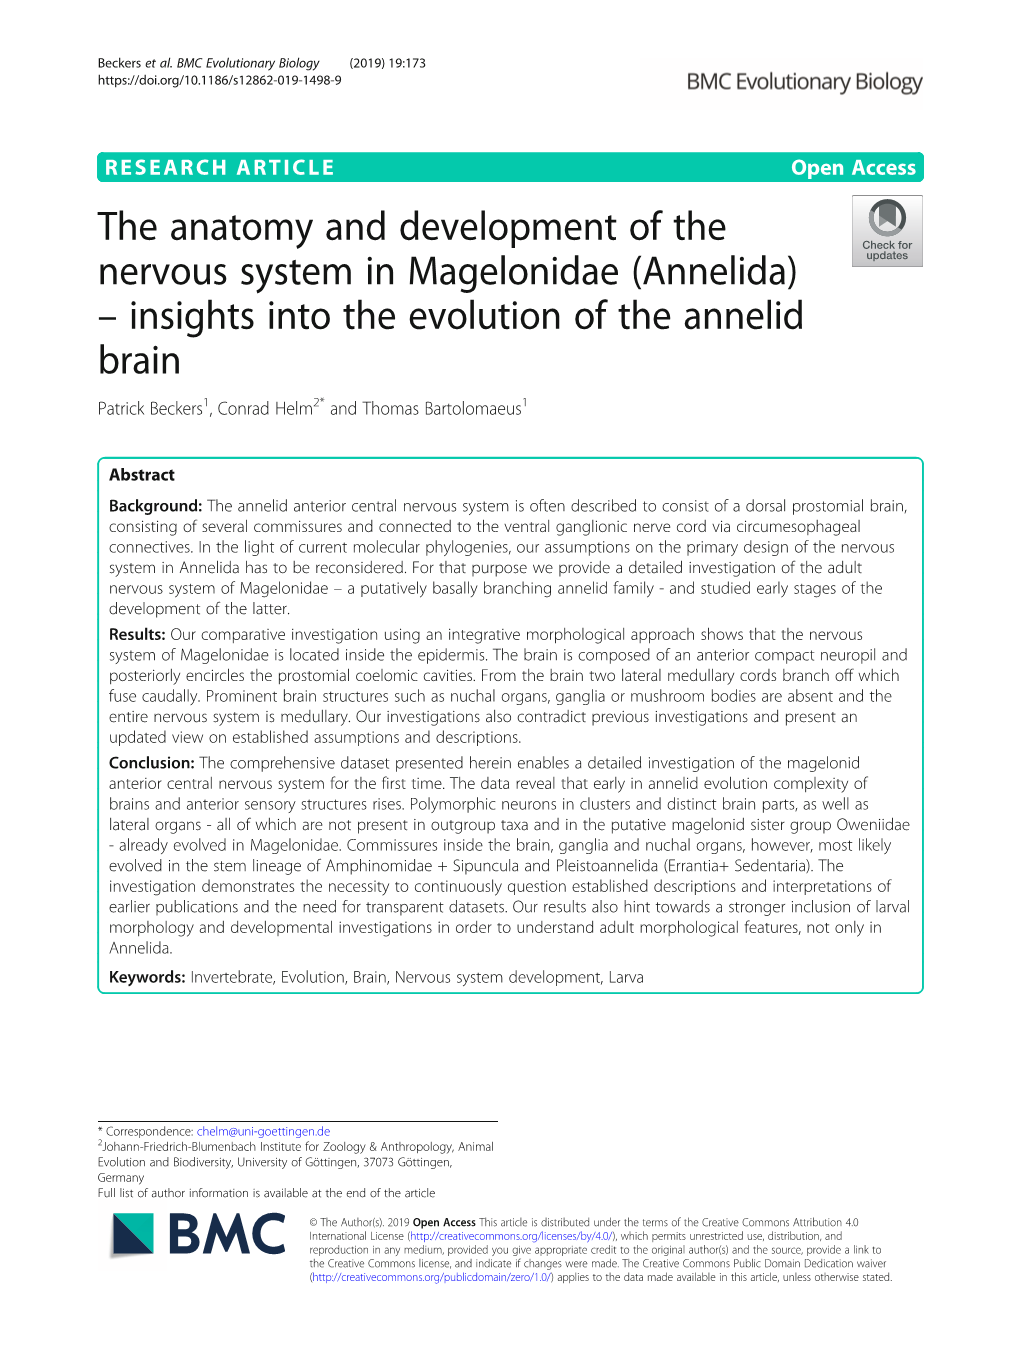 The Anatomy and Development of the Nervous System in Magelonidae